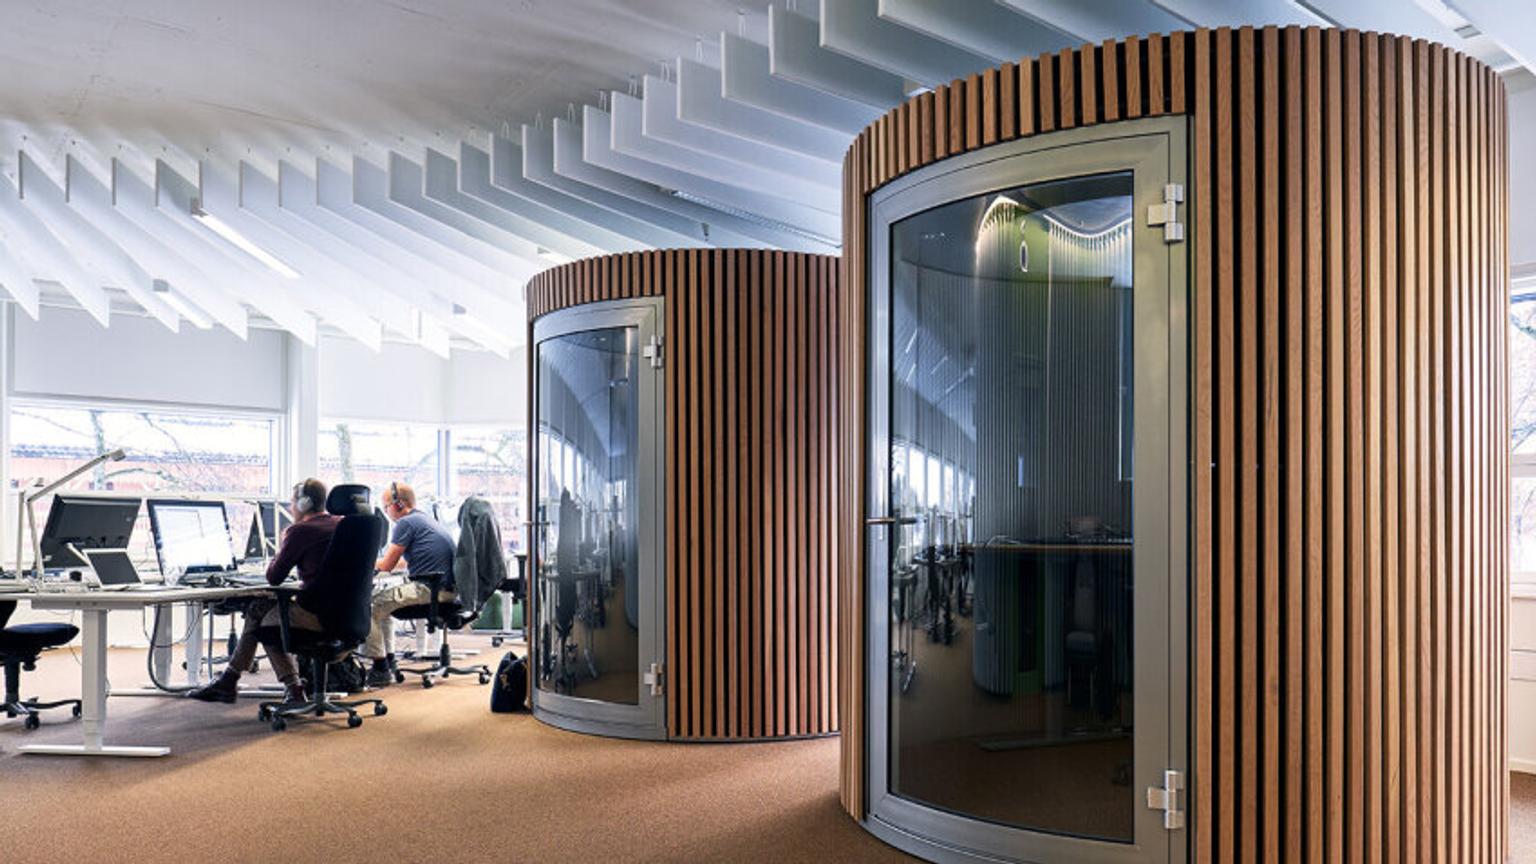 Two single-person meetingrooms inside an office. Wooden panels on the boxes